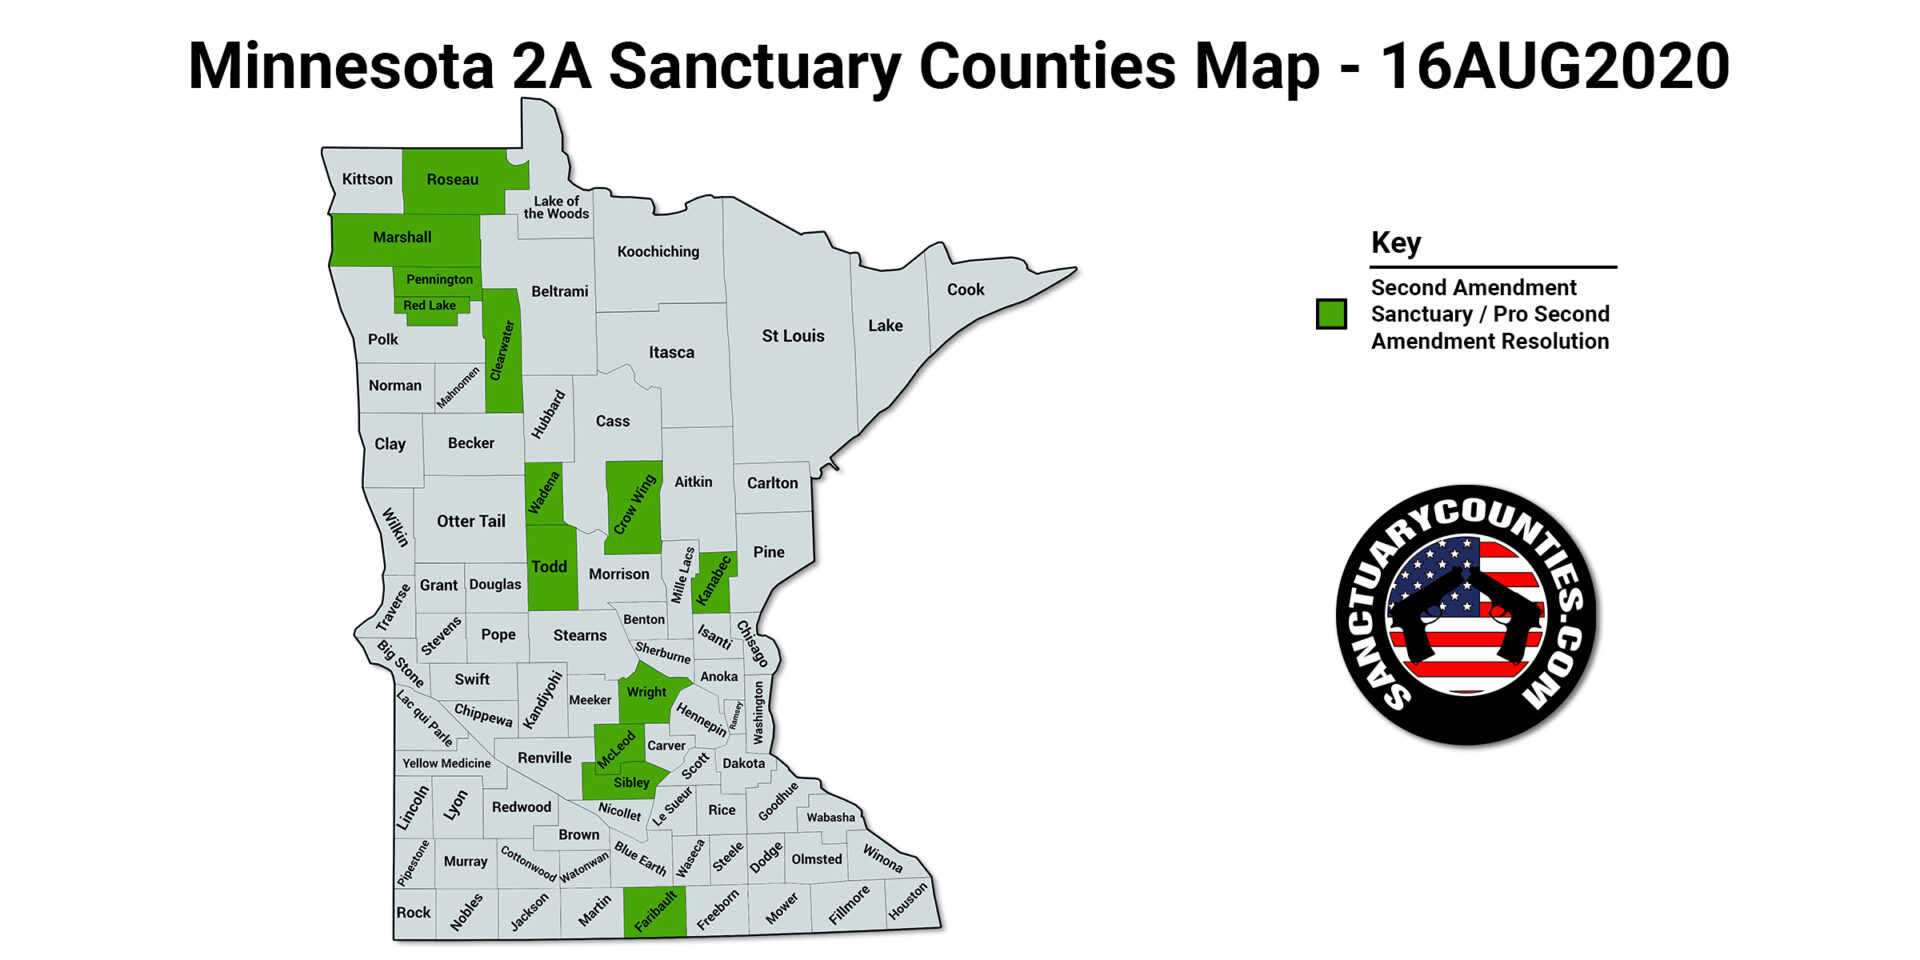 Minnesota 2A Sanctuary Counties Map